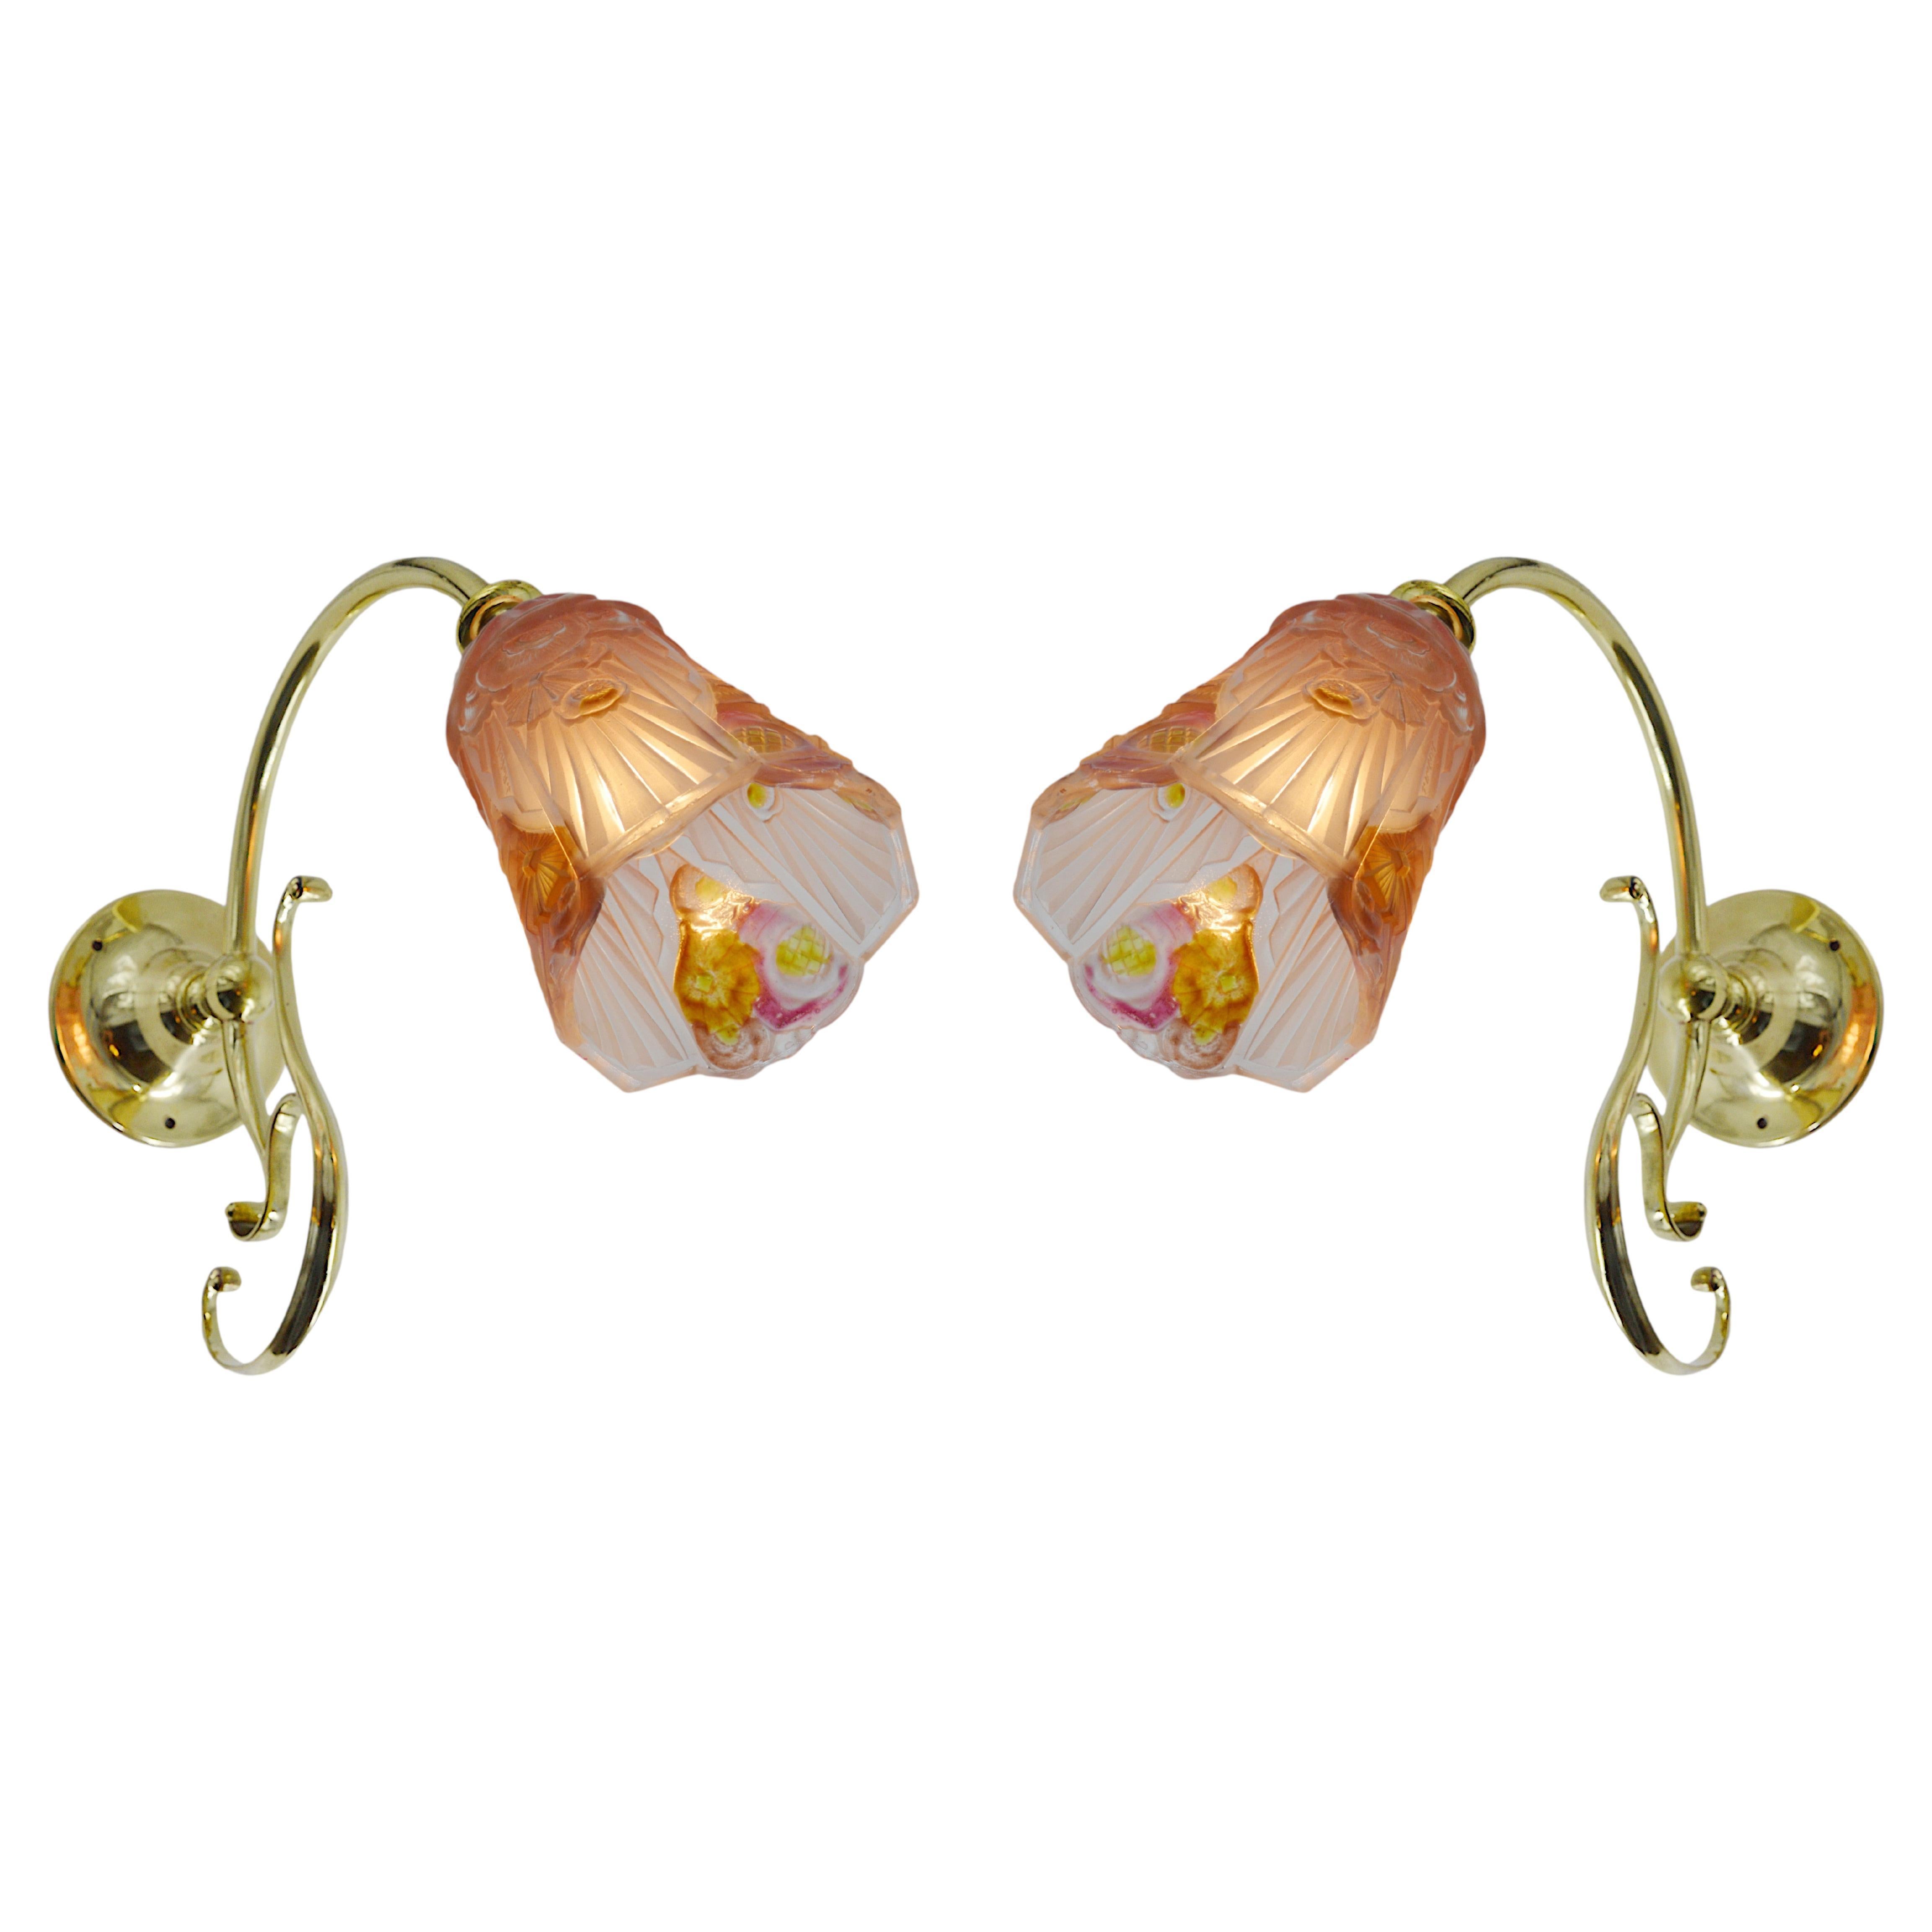 Jean Gauthier French Art Deco Pair of Enameled Wall Sconces, 1920s For Sale